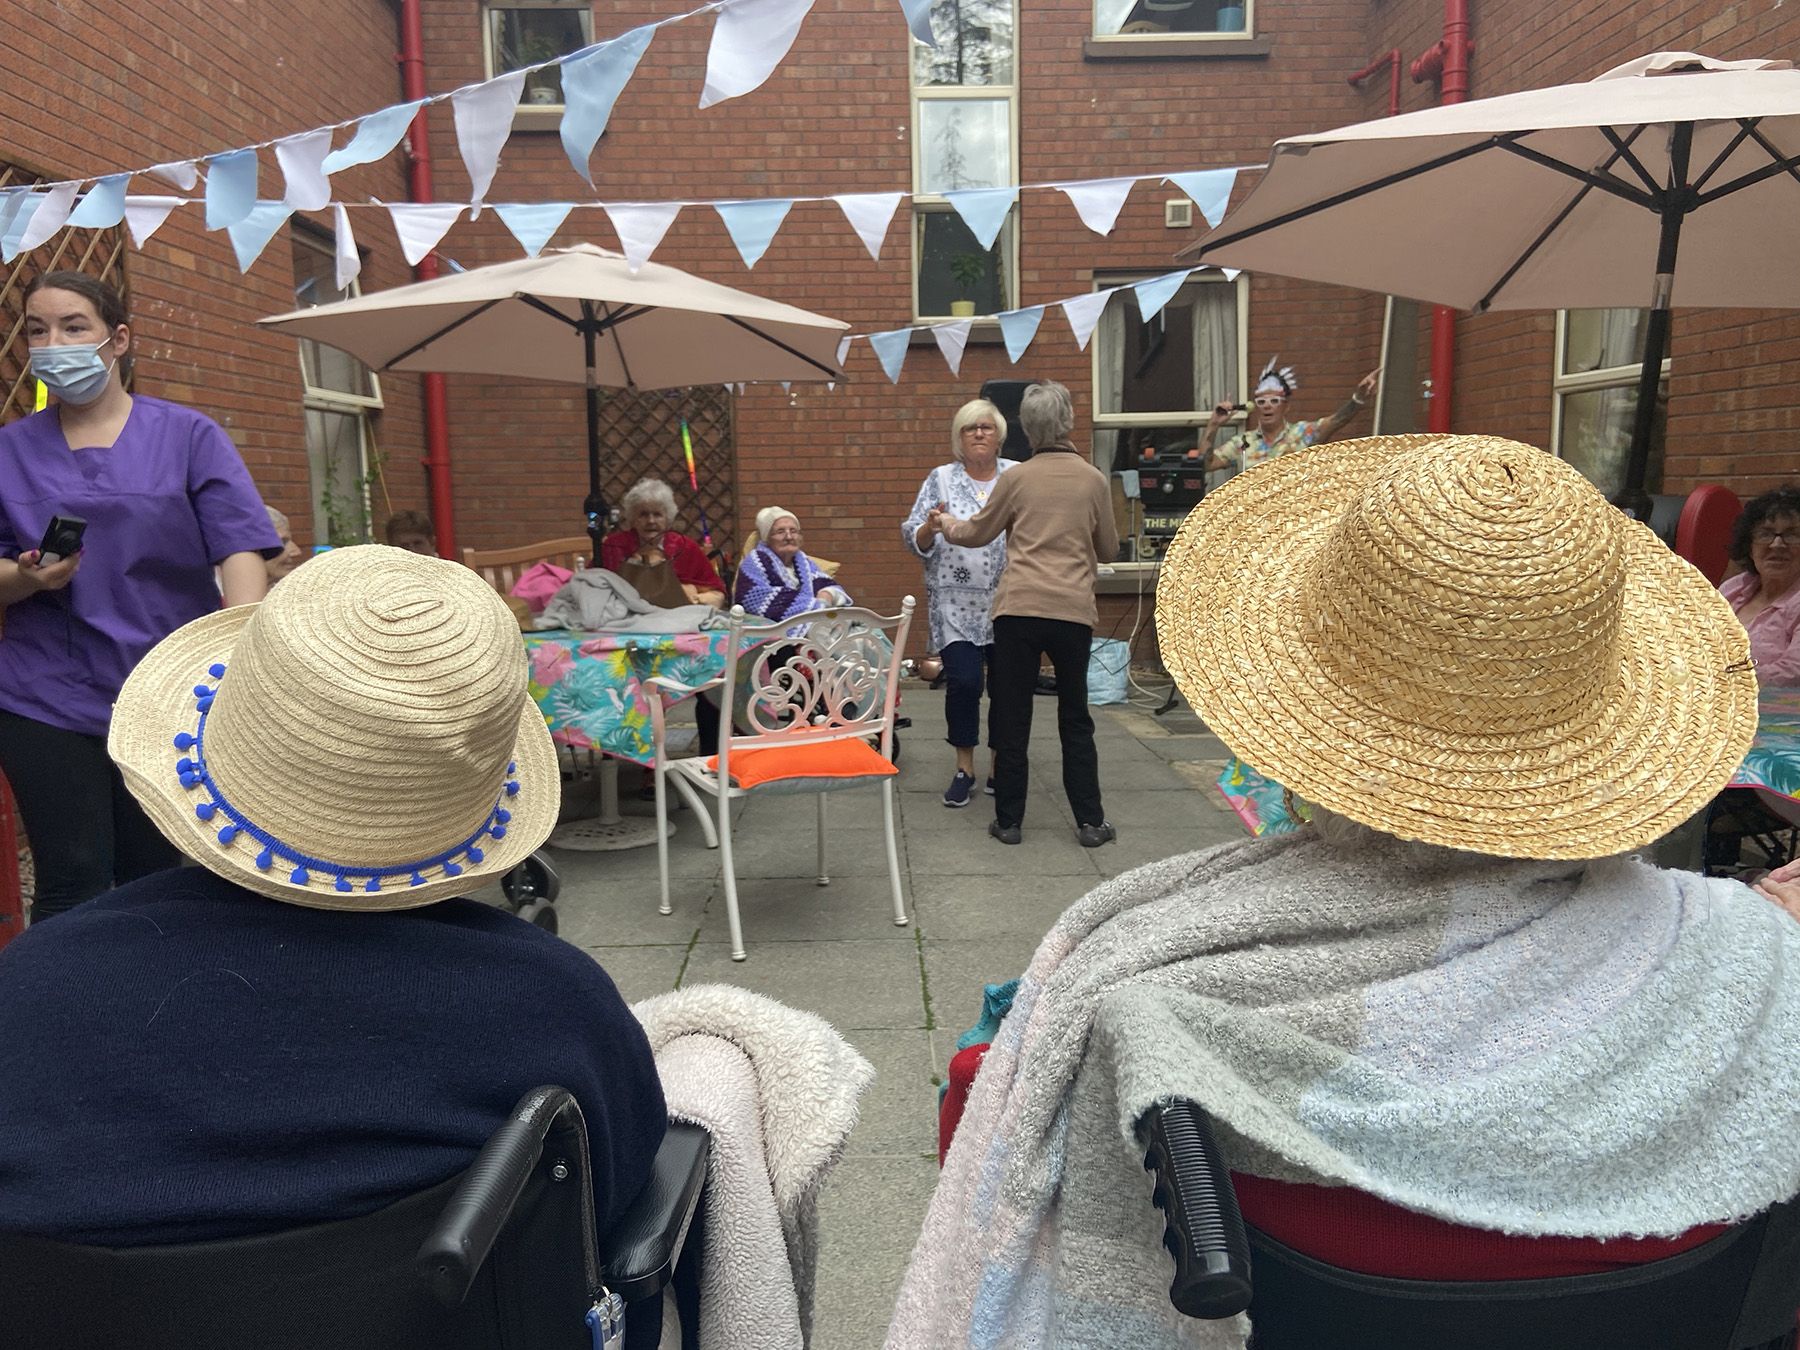 FRUITHILL CARE HOME RESIDENTS ENJOYING A GARDEN PARTY: Government will press for all care home staff to be fully vaccinated. 